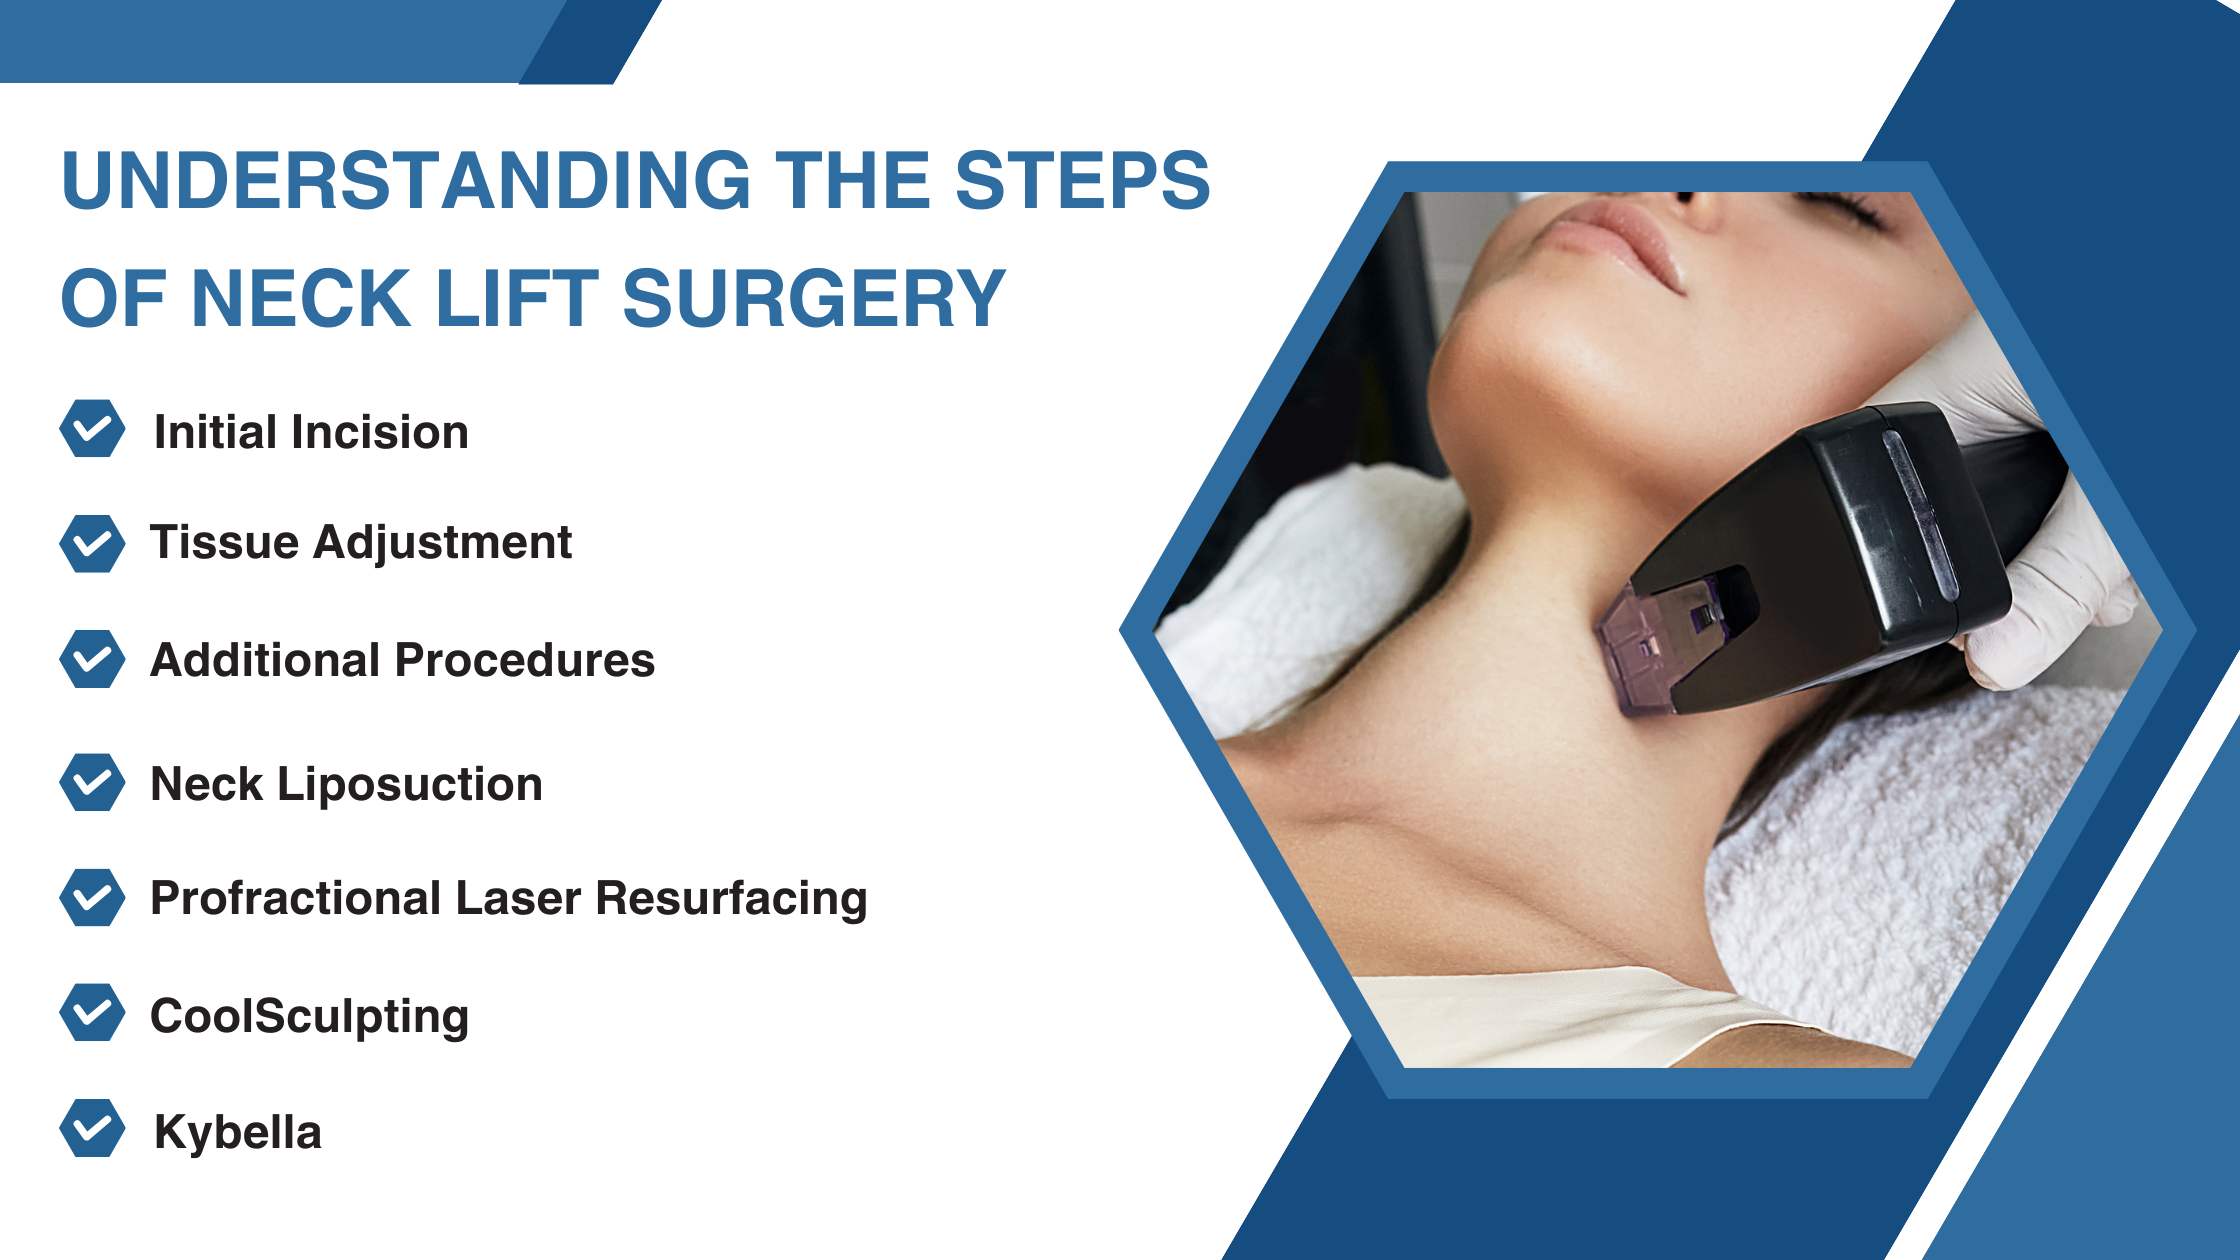 Steps of Neck Lift Surgery